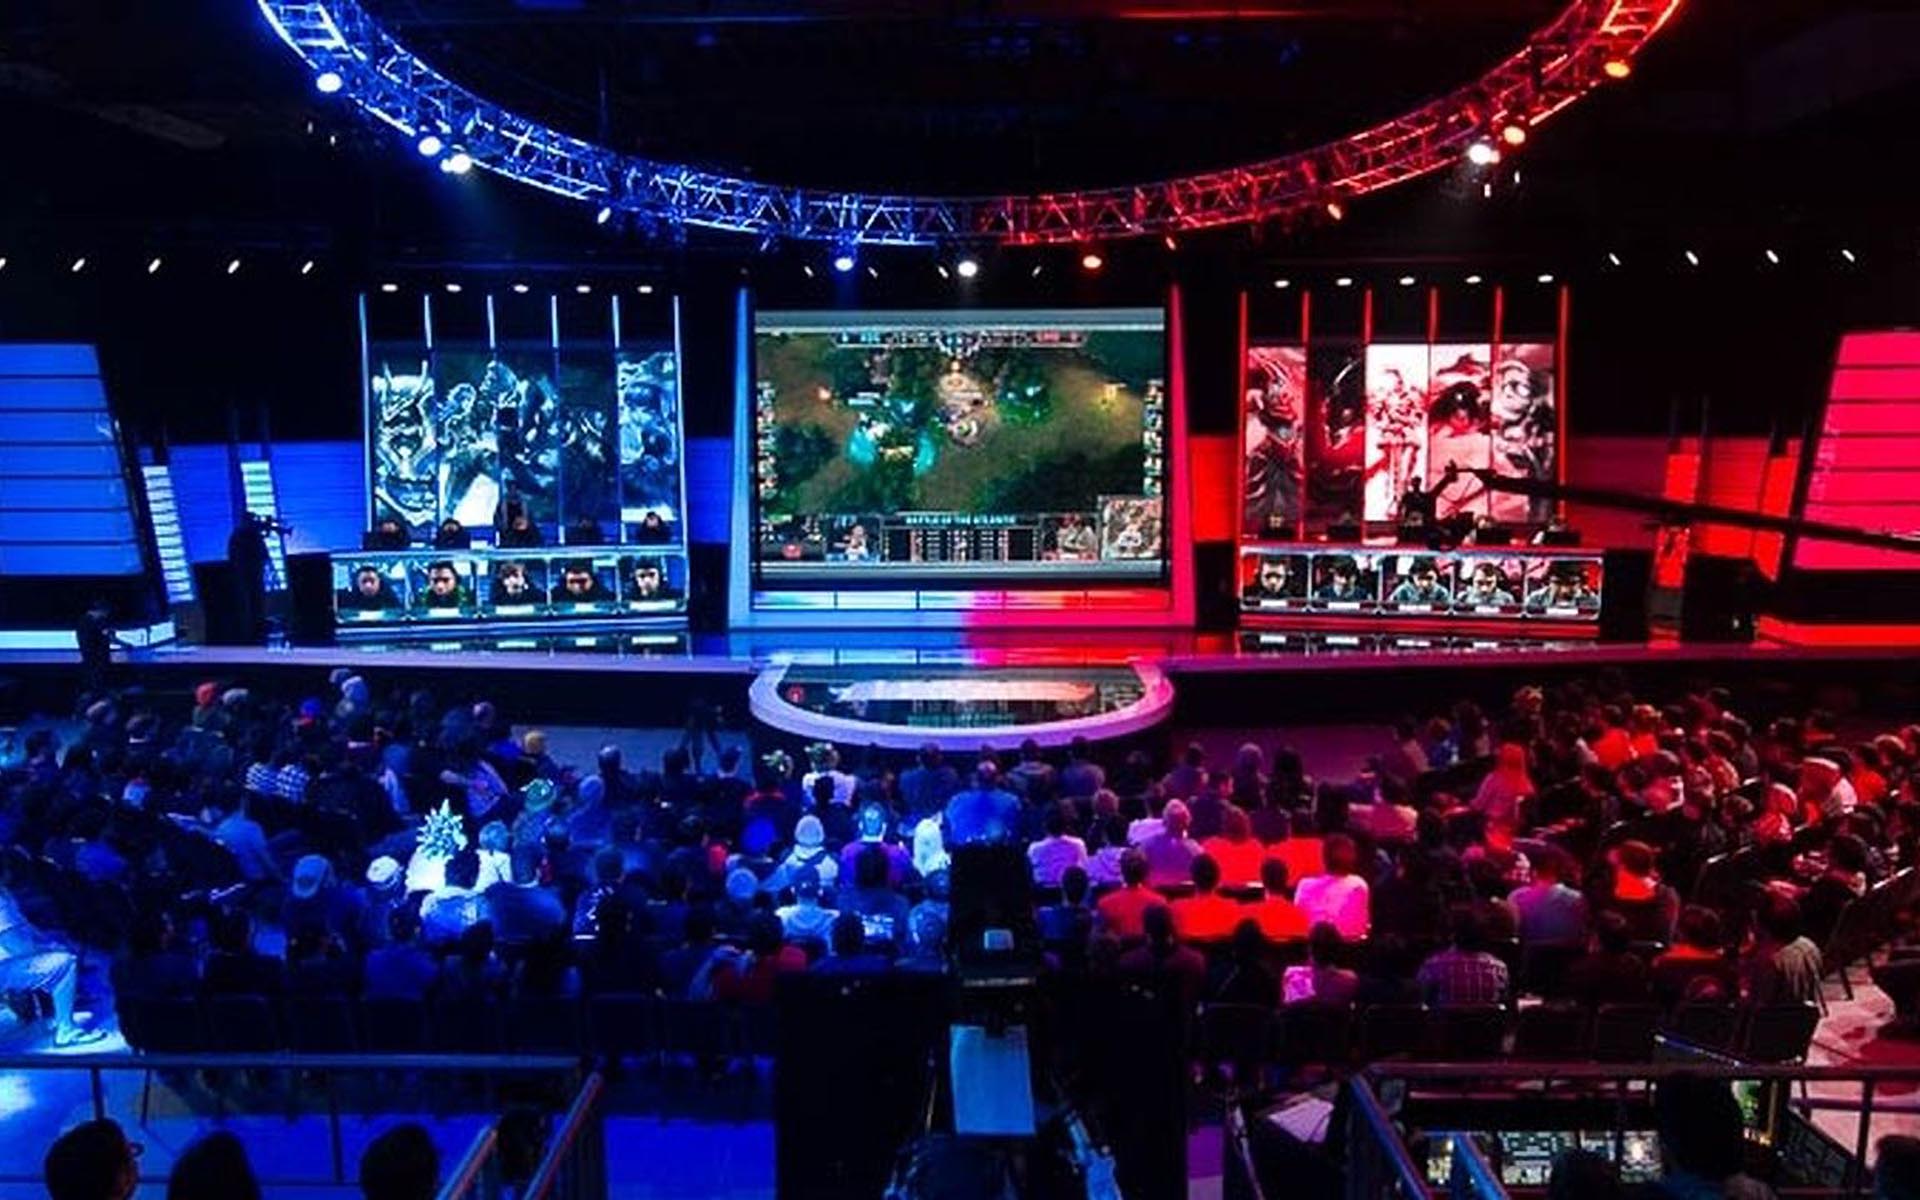 With 500K Active Users Dreamteam Is Prime to Lead the Esports Market